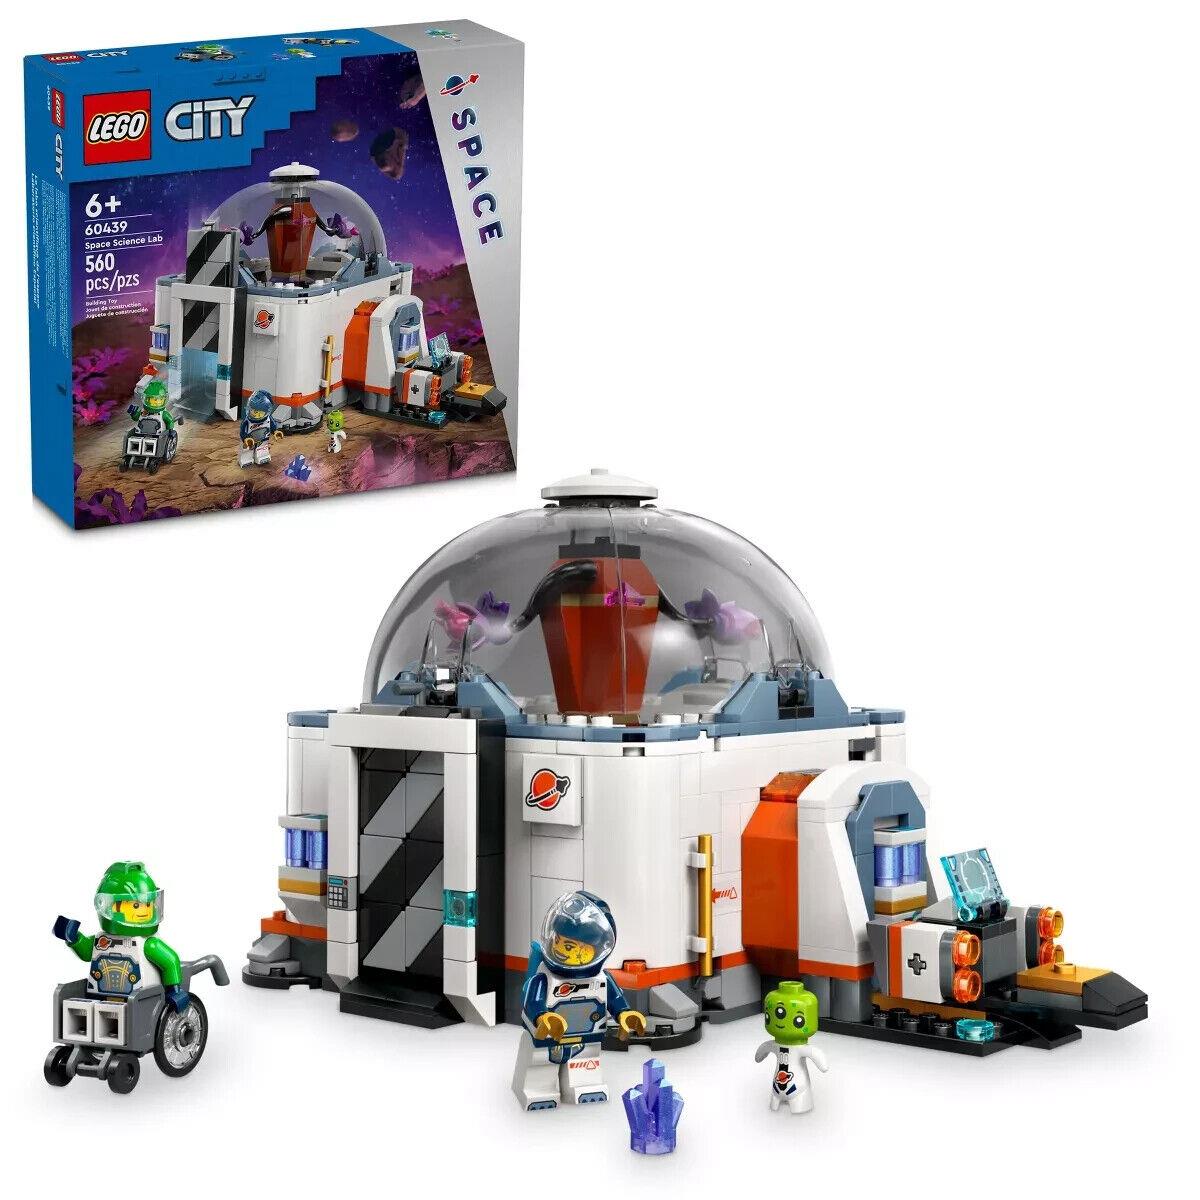 Lego City Space Science Lab Toy Building Set Model 60439 For 2024 Ages 6+